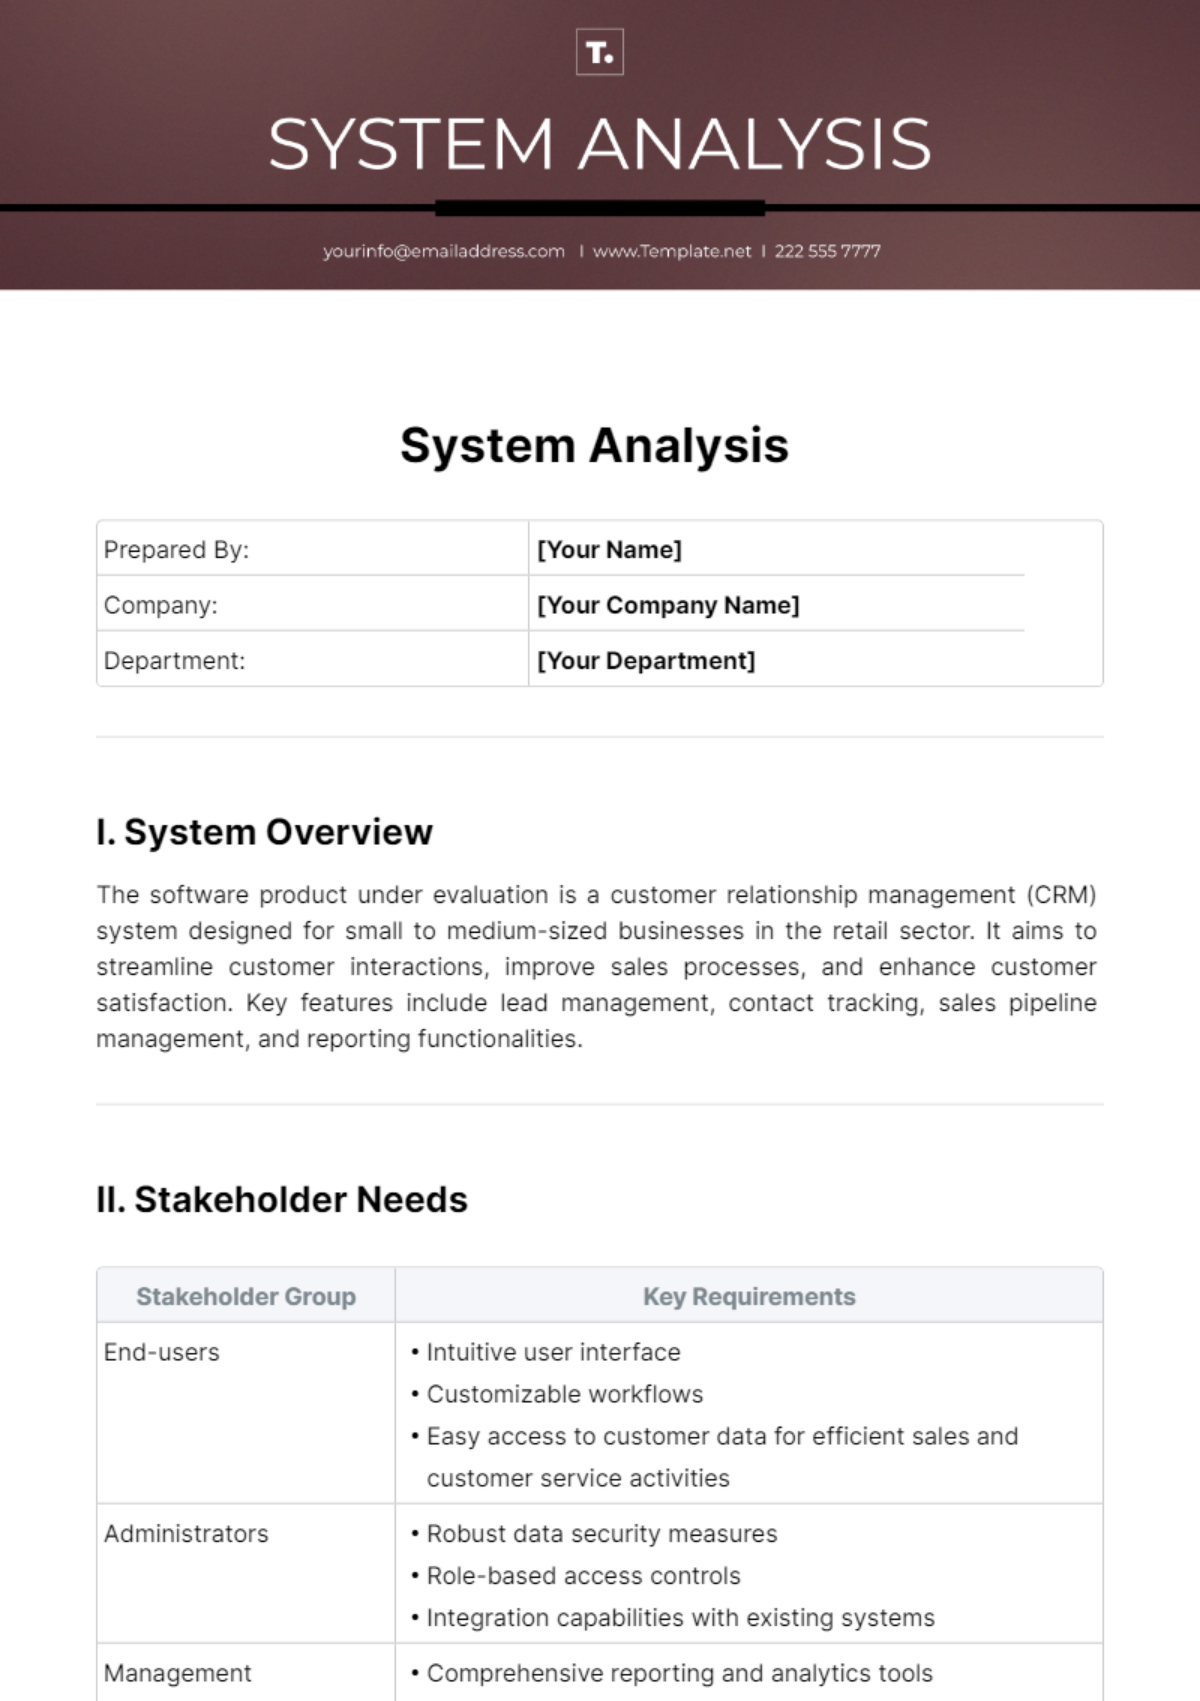 System Analysis Template